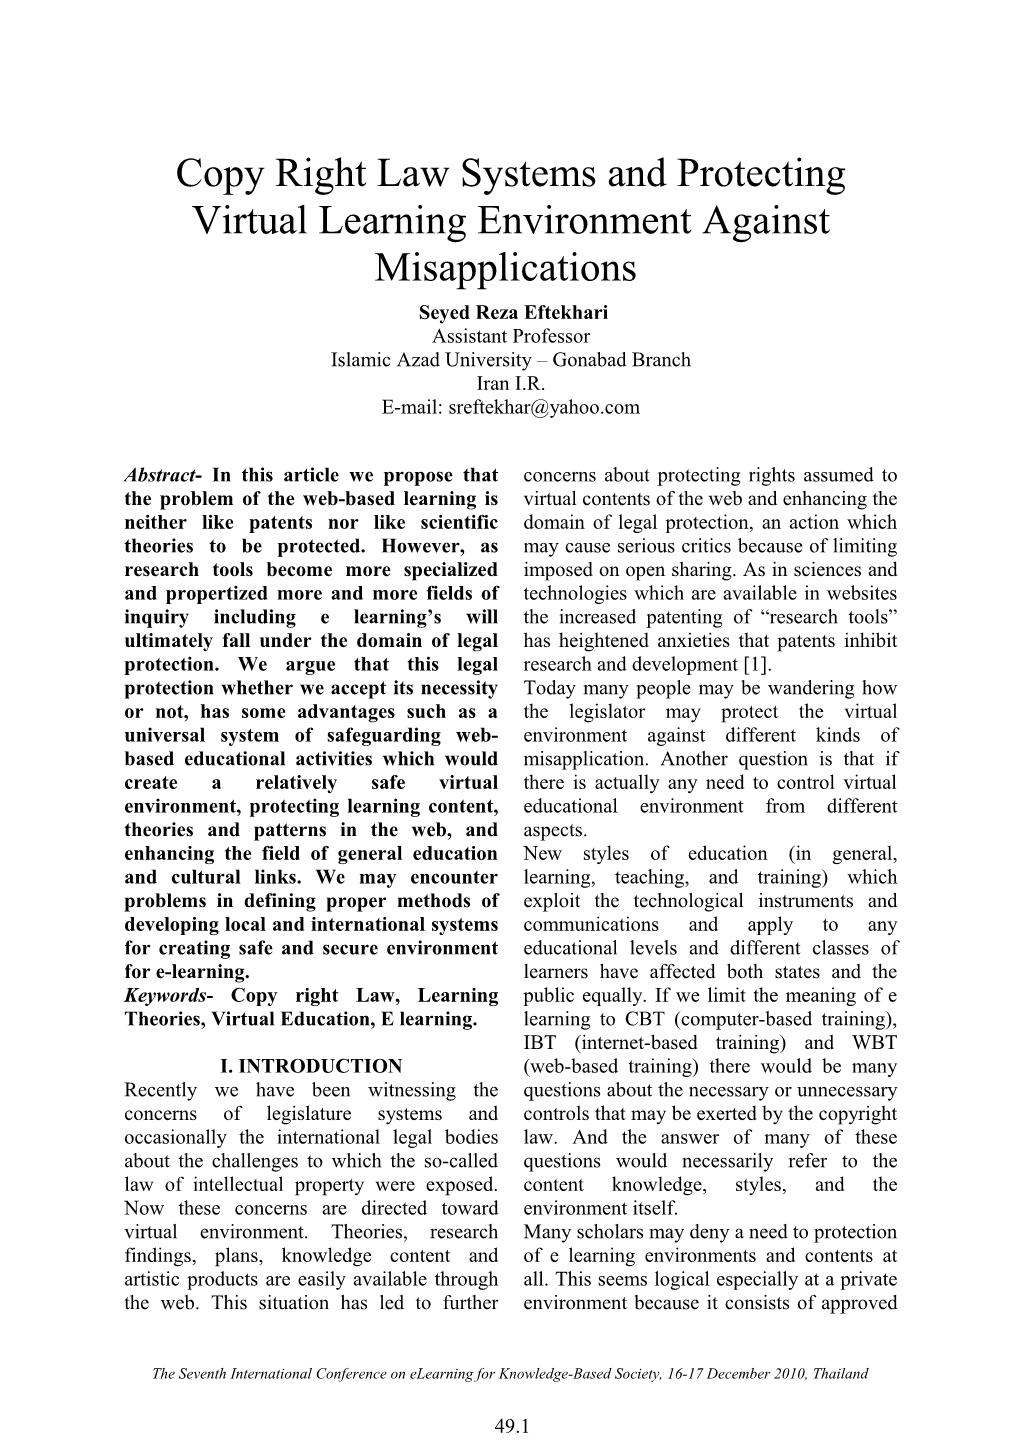 Copy Right Law Systems and Protecting Virtual Learning Environment Against Misapplications